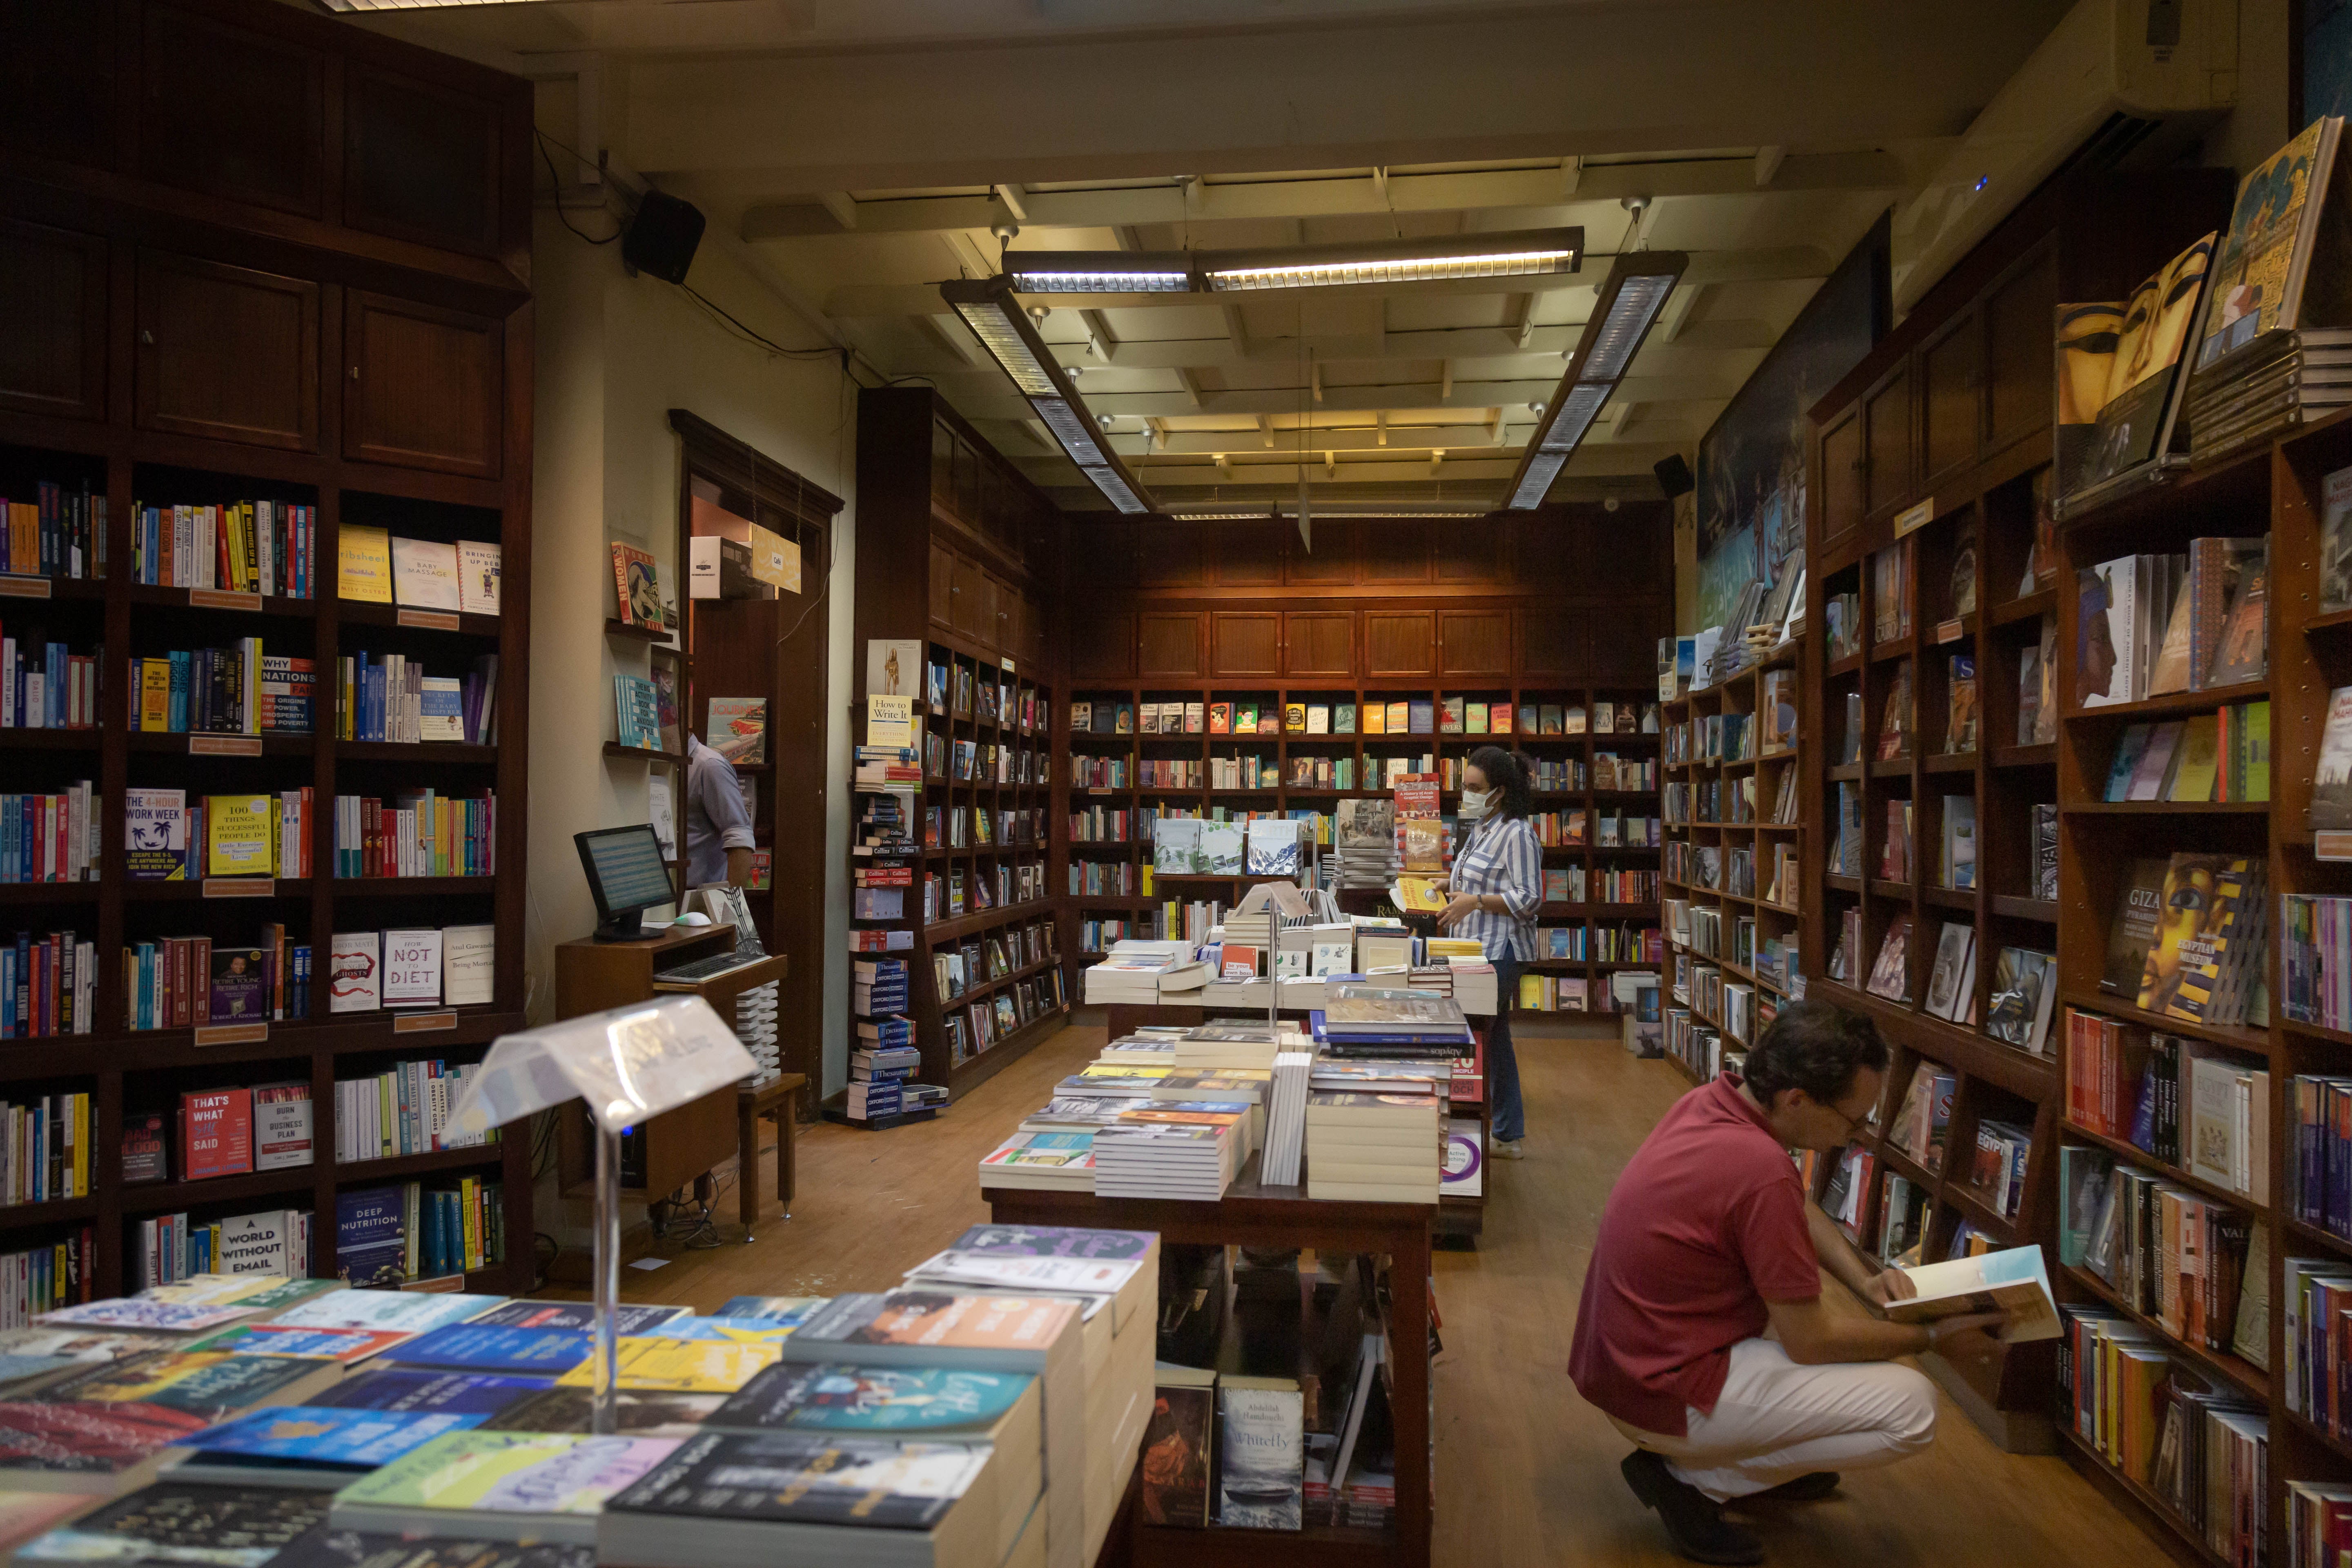 The founders drew inspiration from other beloved bookshops, like Shakespeare and Company in Paris and Rizzoli in New York